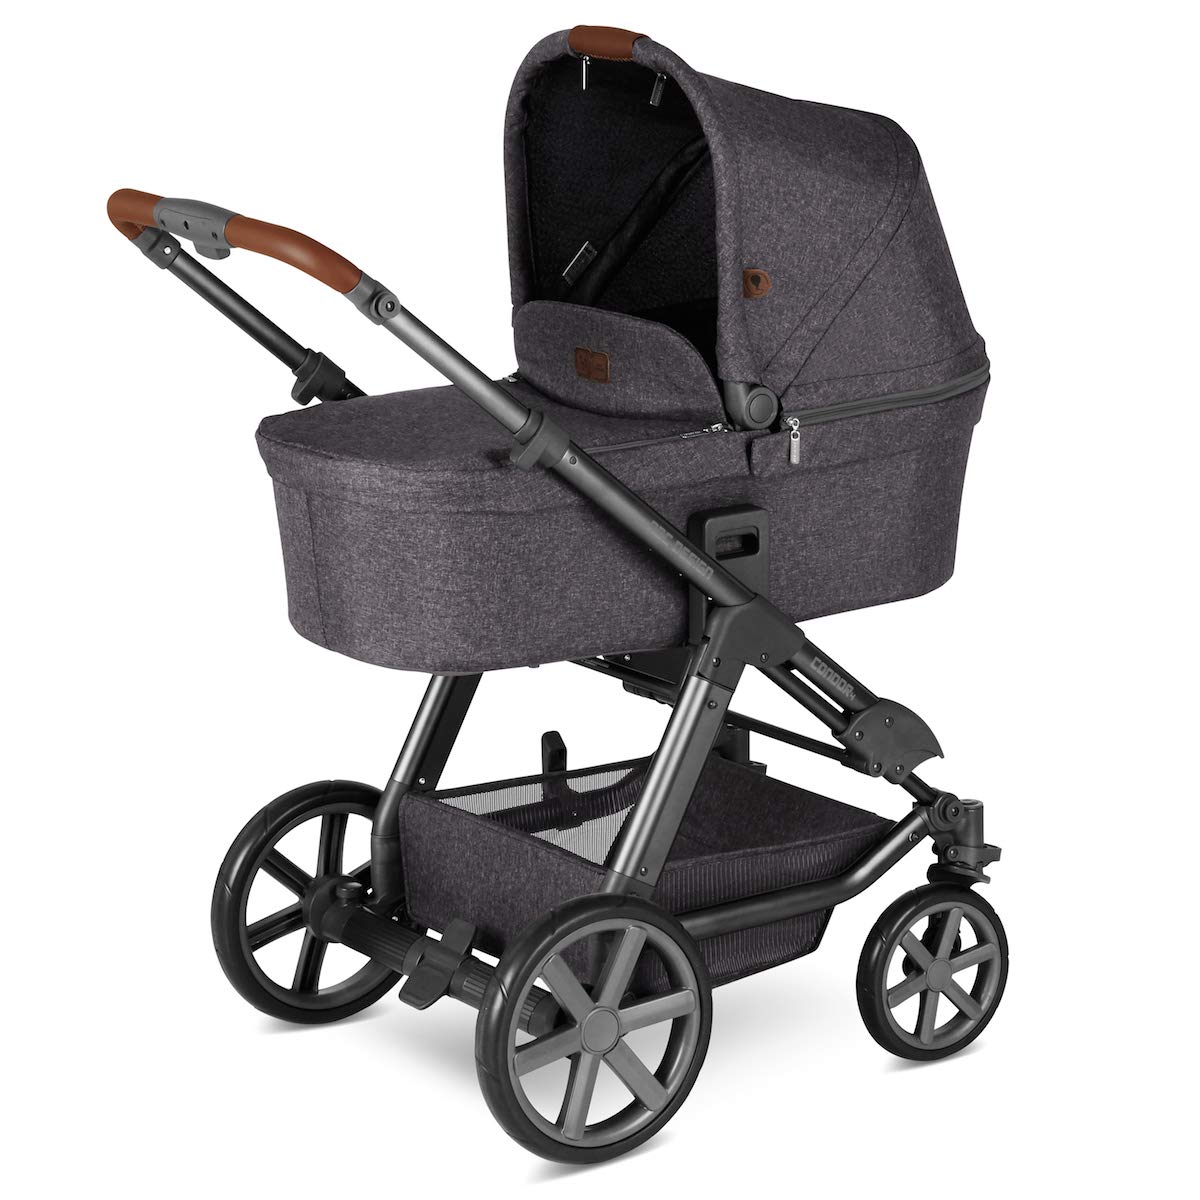 ABC Design 2 in 1 Condor 4 Pushchair - Combination Pushchair for Newborns & Babies - Includes Sports Seat Buggy & Carry Cot - Wheel Suspension - Colour: Street